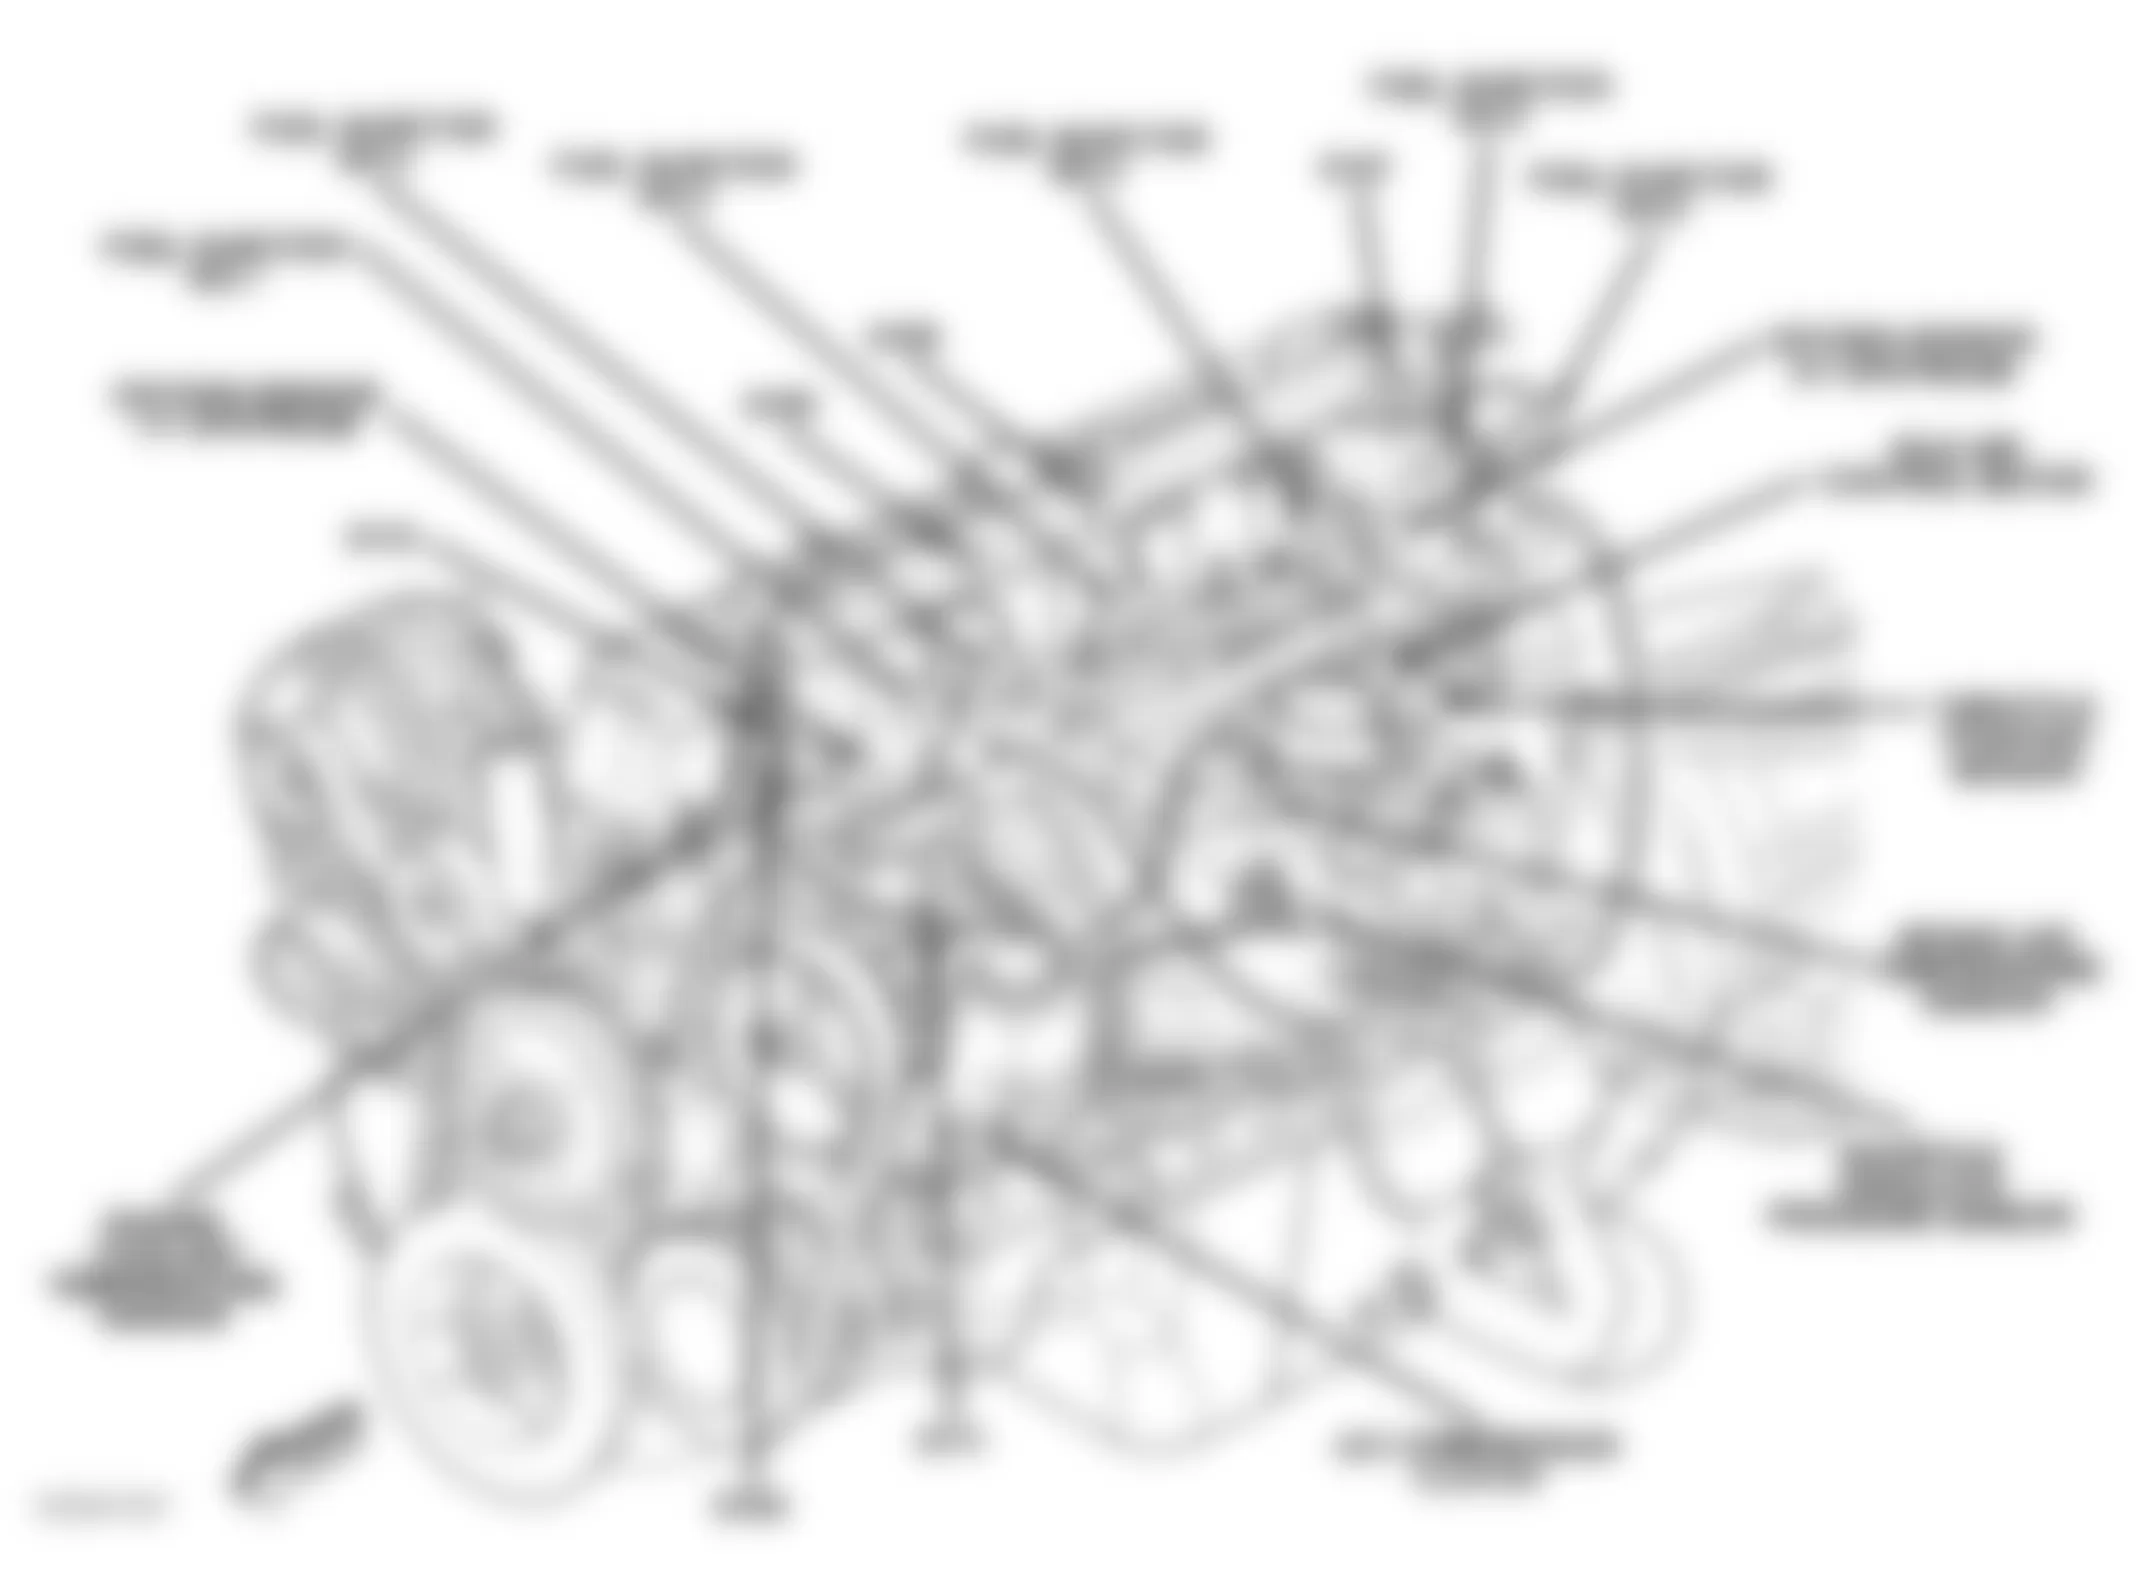 Jeep Grand Cherokee Freedom 2004 - Component Locations -  Left Side Of Engine (4.0L)